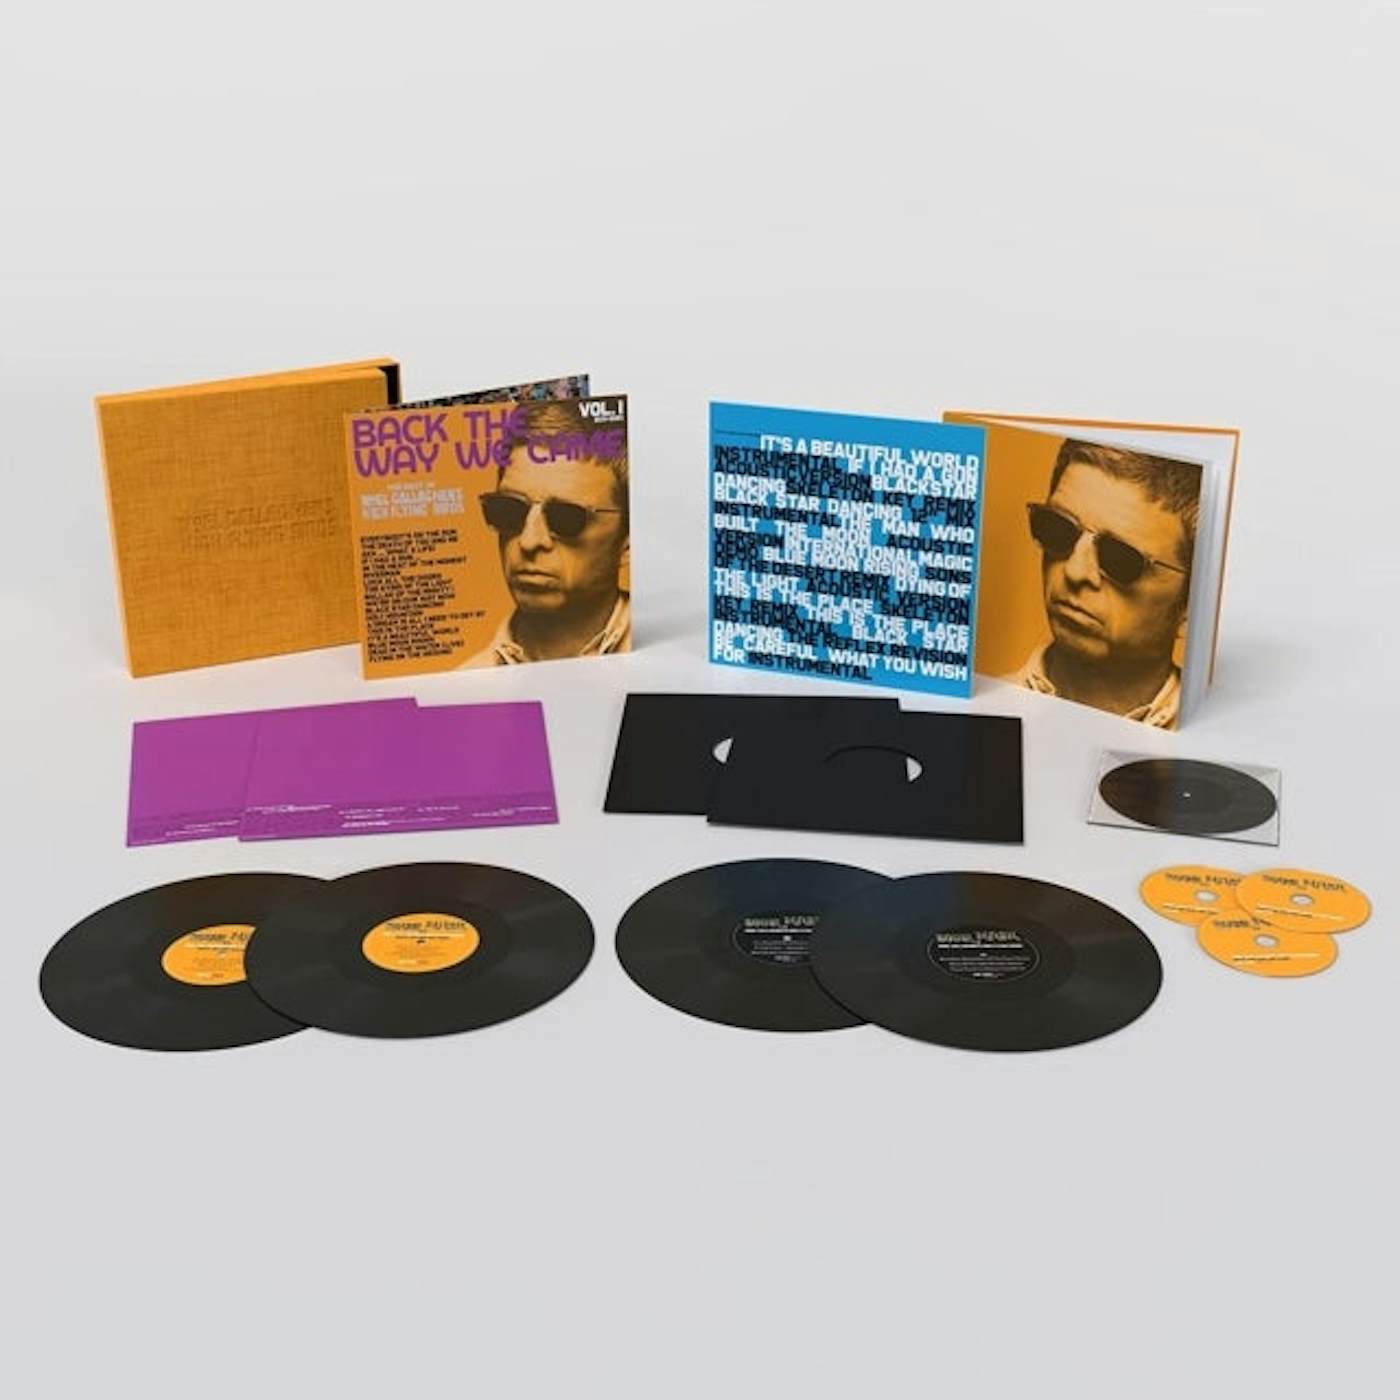 Noel Gallagher's High Flying Birds LP Vinyl Record Box Set - Back The Way We Came: Vol. 1 (20. 11 -20. 21) (Deluxe Edition)